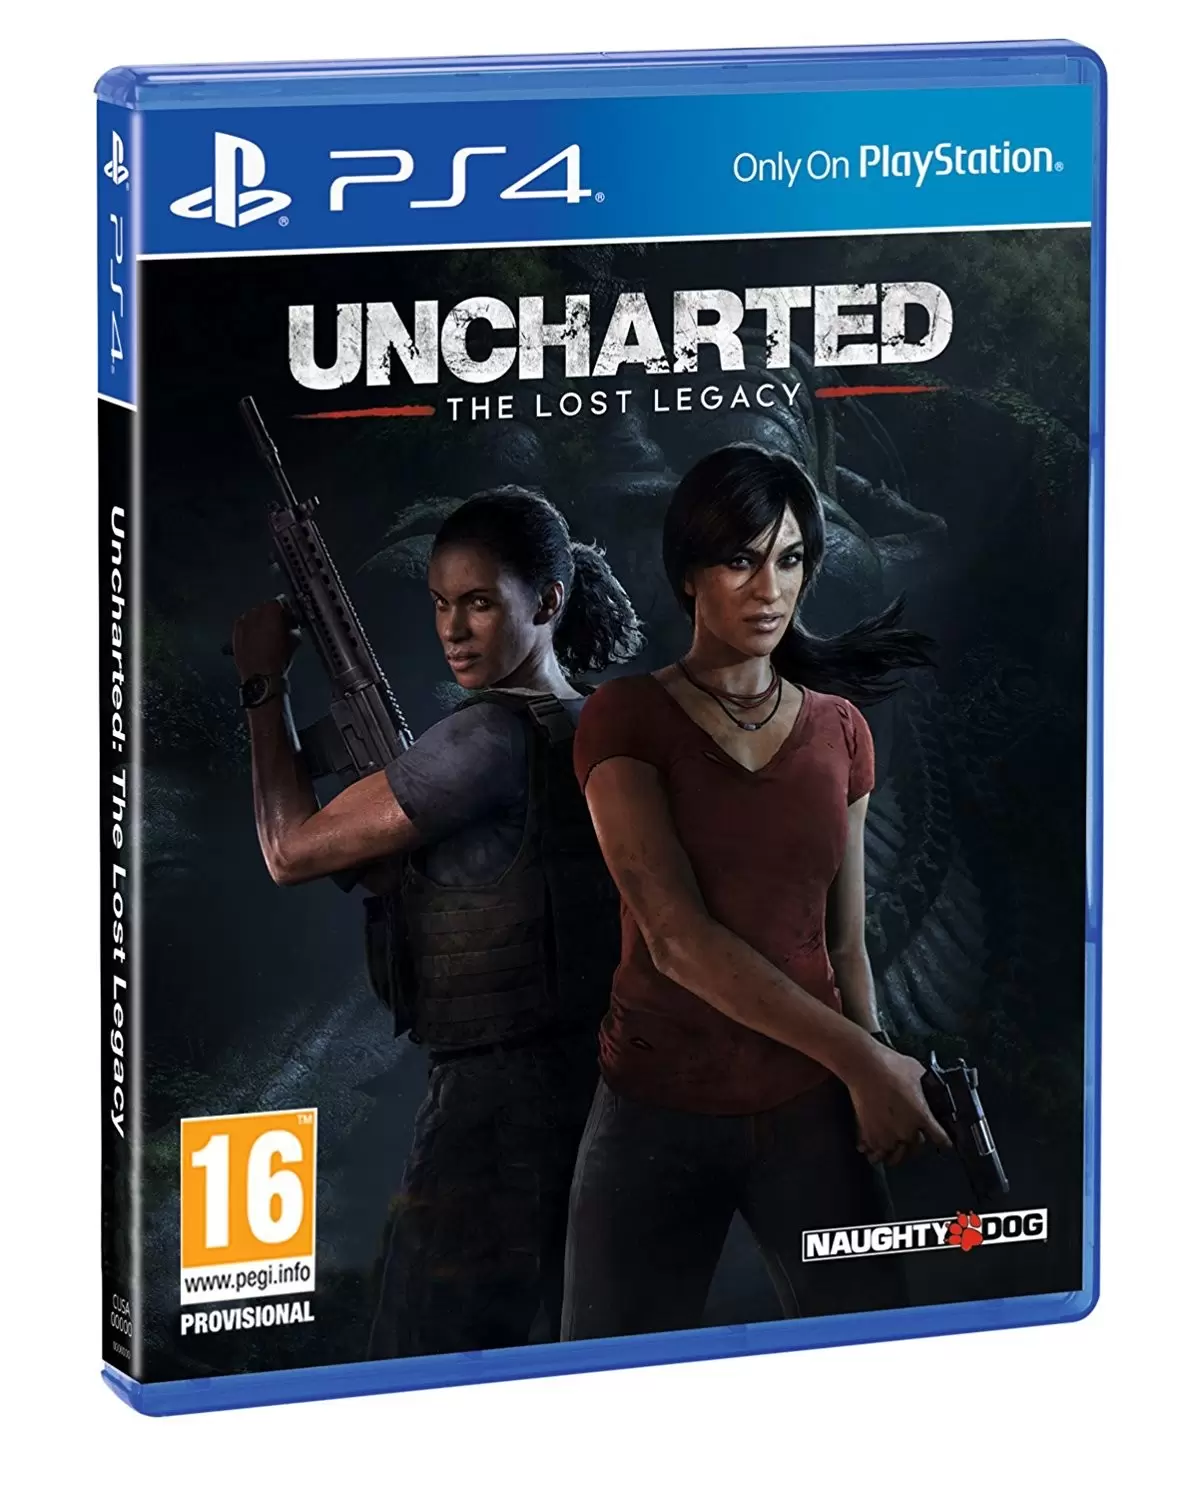 PS4 Games - Uncharted The Lost Legacy